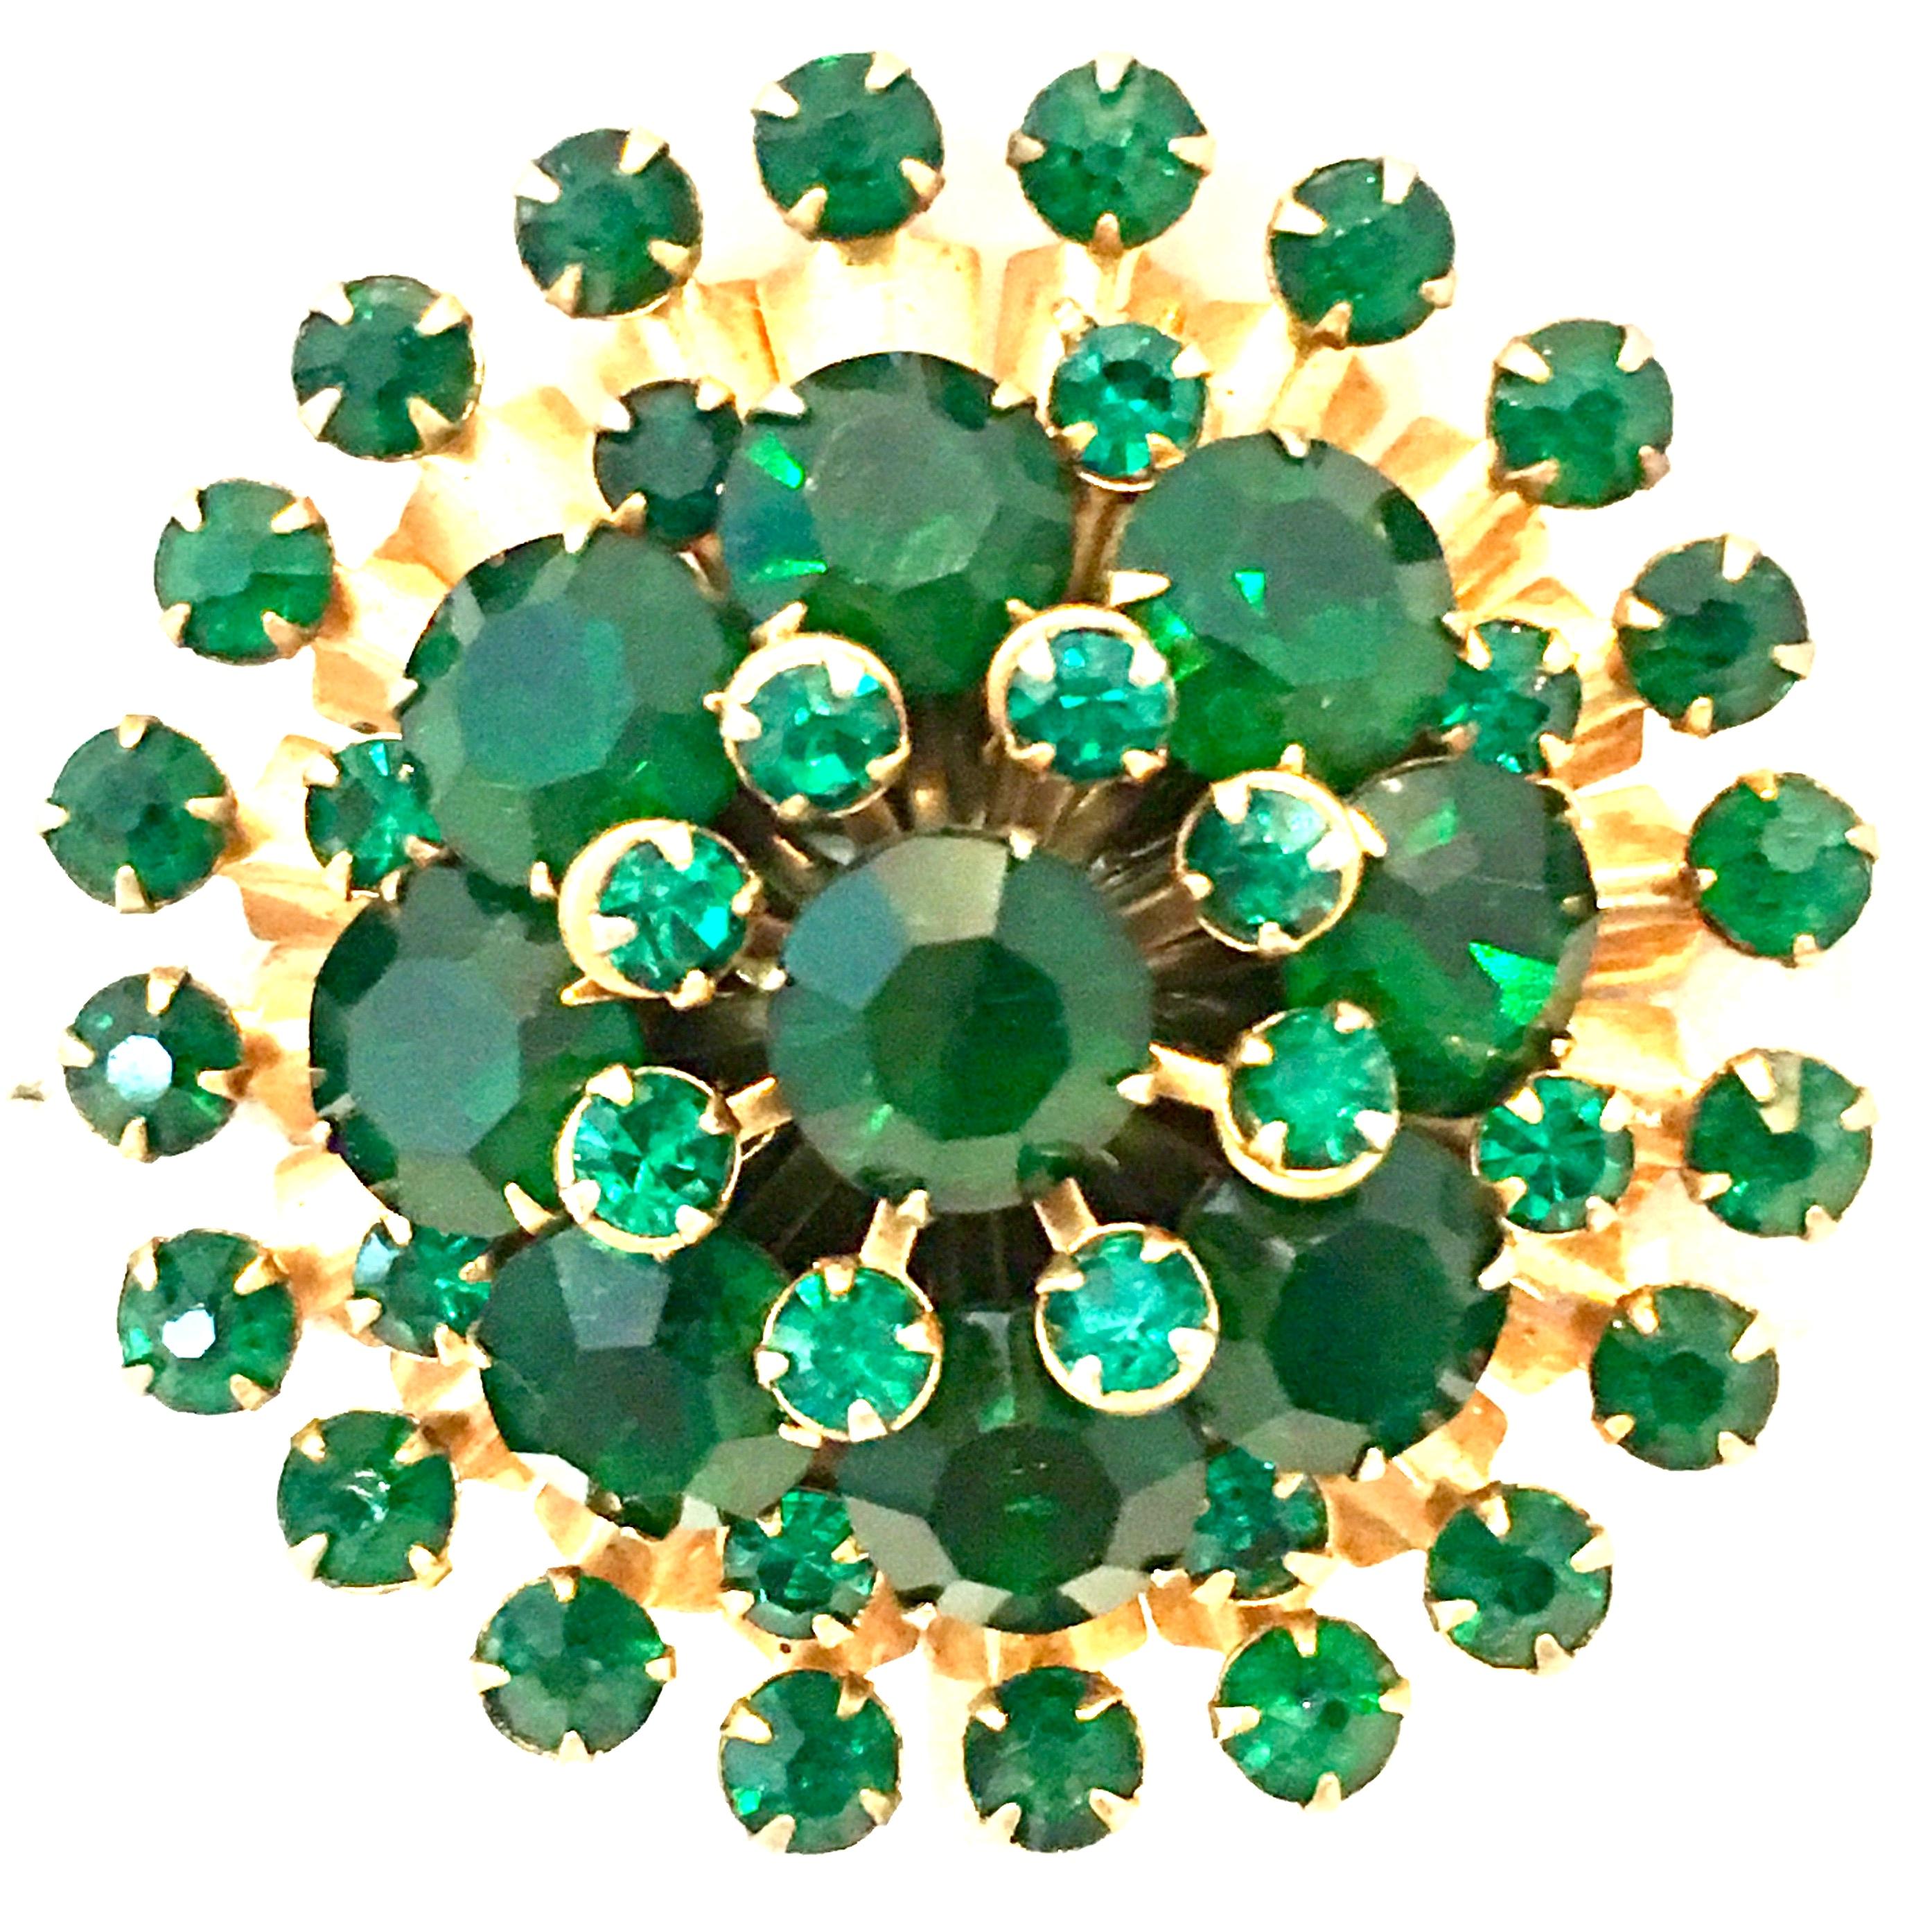 20th Century Gold Plate & Emerald Green Austrian Crystal Dimensional Abstract Starburst Brooch. Features gold plate prong set brilliant cut and faceted Austrian crystal stones. The larger stones are approximately, .35